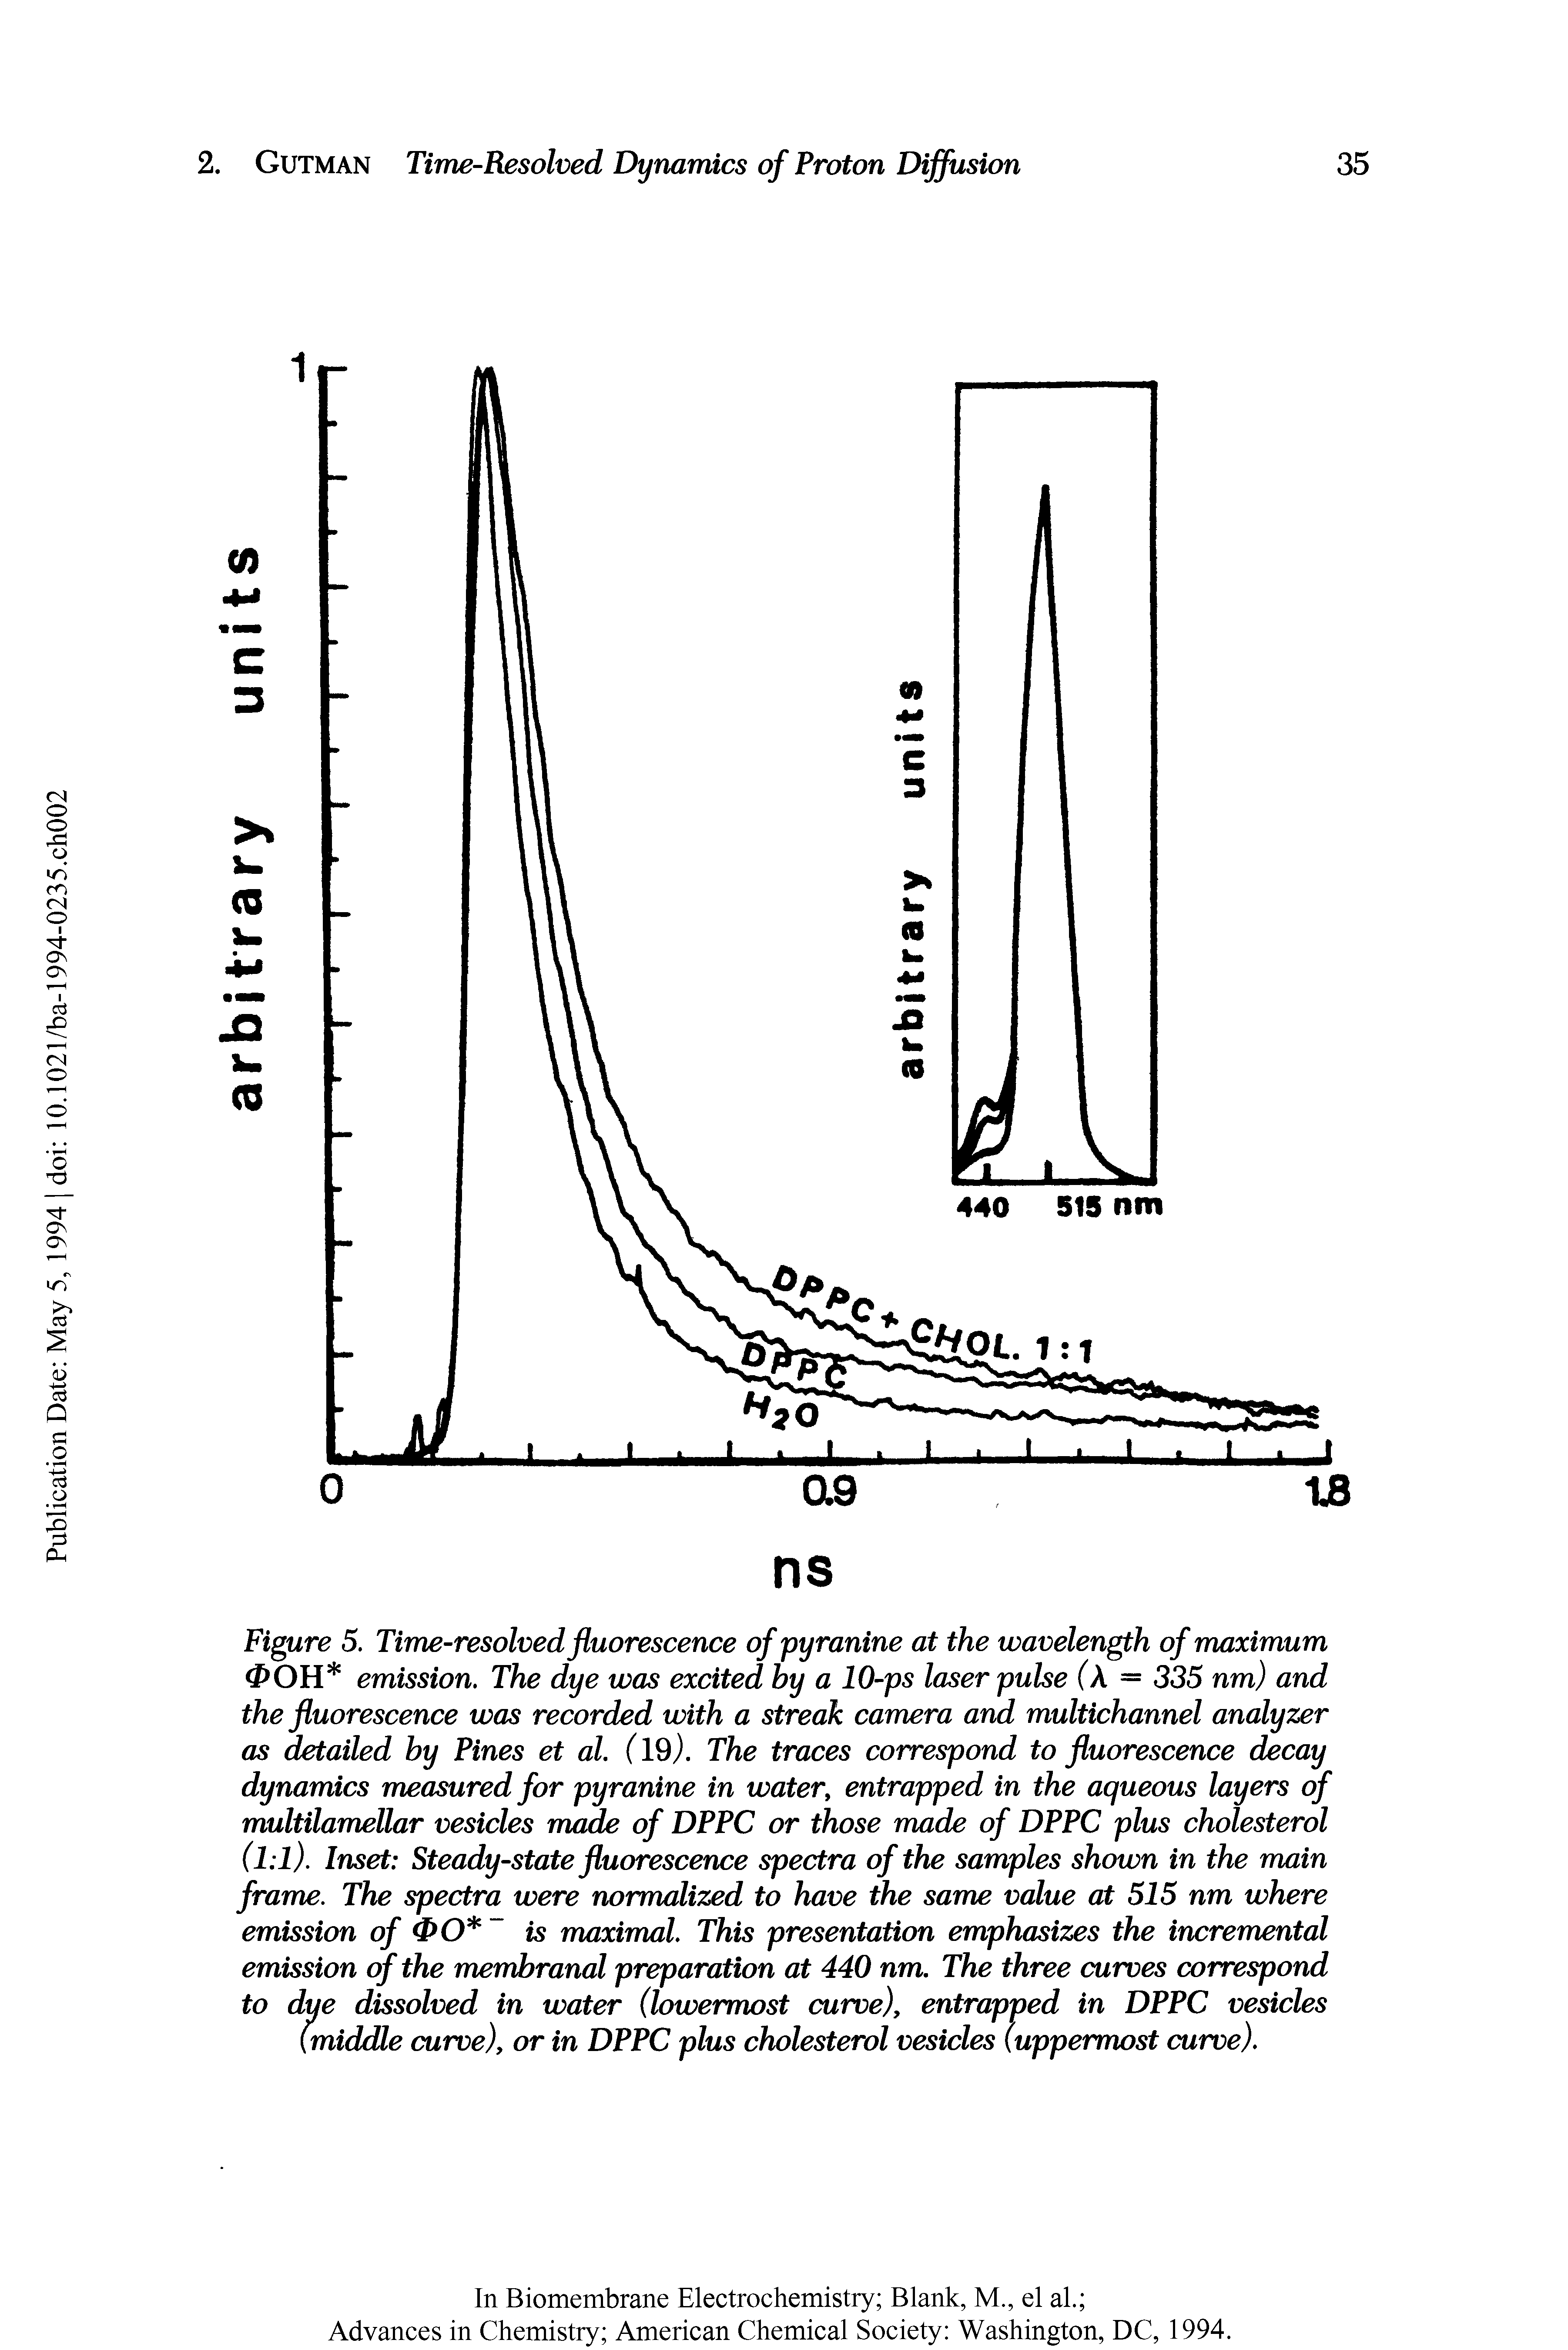 Figure 5. Time-resolved fluorescence of pyranine at the wavelength of maximum <P OH emission. The dye was excited by a 10-ps laser pulse ( = 335 nm) and the fluorescence was recorded with a streak camera and multichannel analyzer as detailed by Pines et al. (19,). The traces correspond to fluorescence decay dynamics measured for pyranine in water, entrapped in the aqueous layers of multilamellar vesicles made of DPPC or those made of DPPC plus cholesterol (hi). Inset Steady-state fluorescence spectra of the samples shown in the main frame. The spectra were normalized to have the same value at 515 nm where emission of <PO is maximal. This presentation emphasizes the incremental emission of the membranal preparation at 440 nm. The three curves correspond to dye dissolved in water (lowermost curve), entrapped in DPPC vesicles (middle curve), or in DPPC plus cholesterol vesicles (uppermost curve).